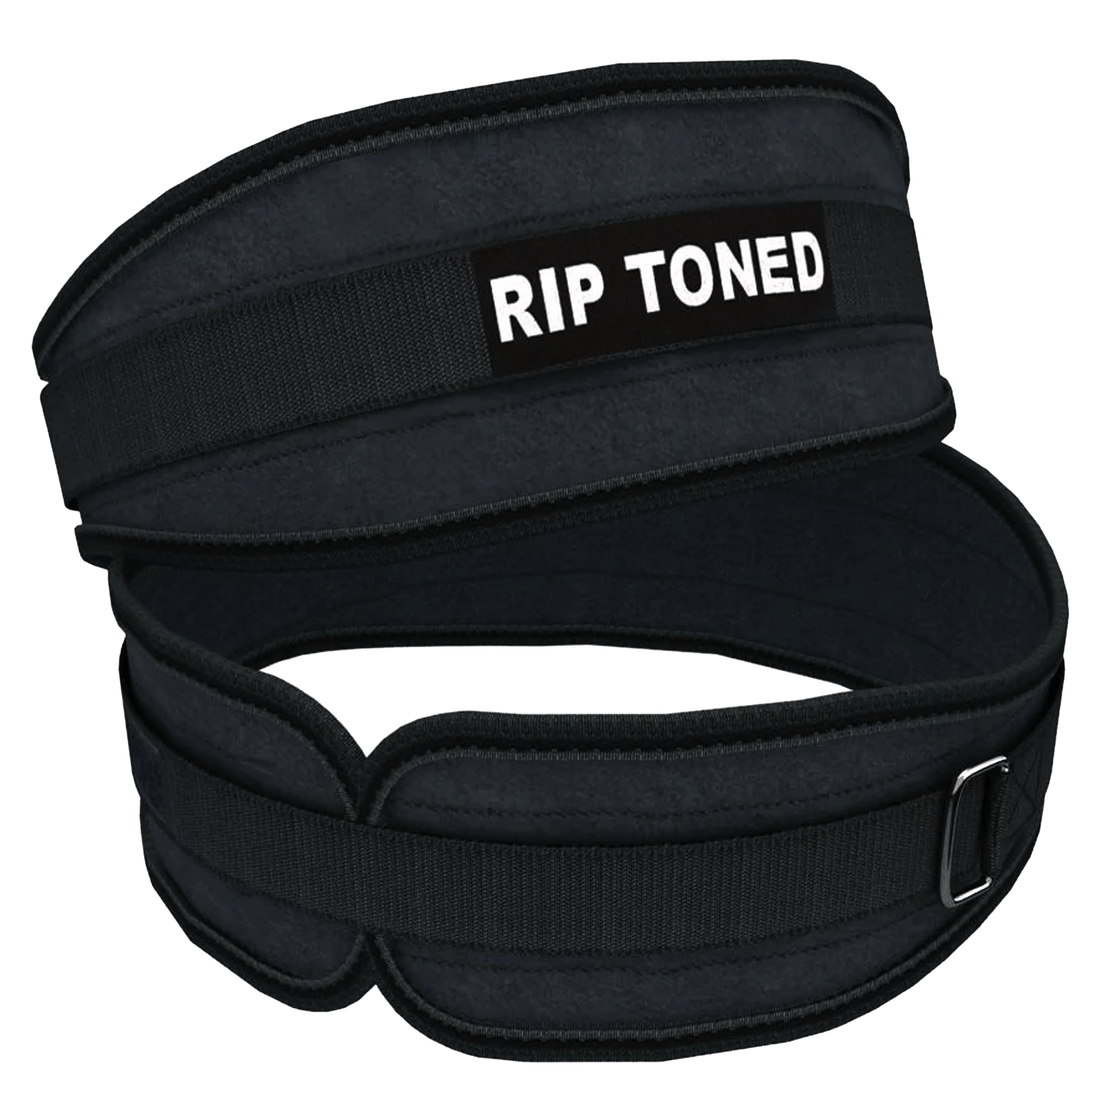 Weight Lifting Belt Back Support - Rip Toned